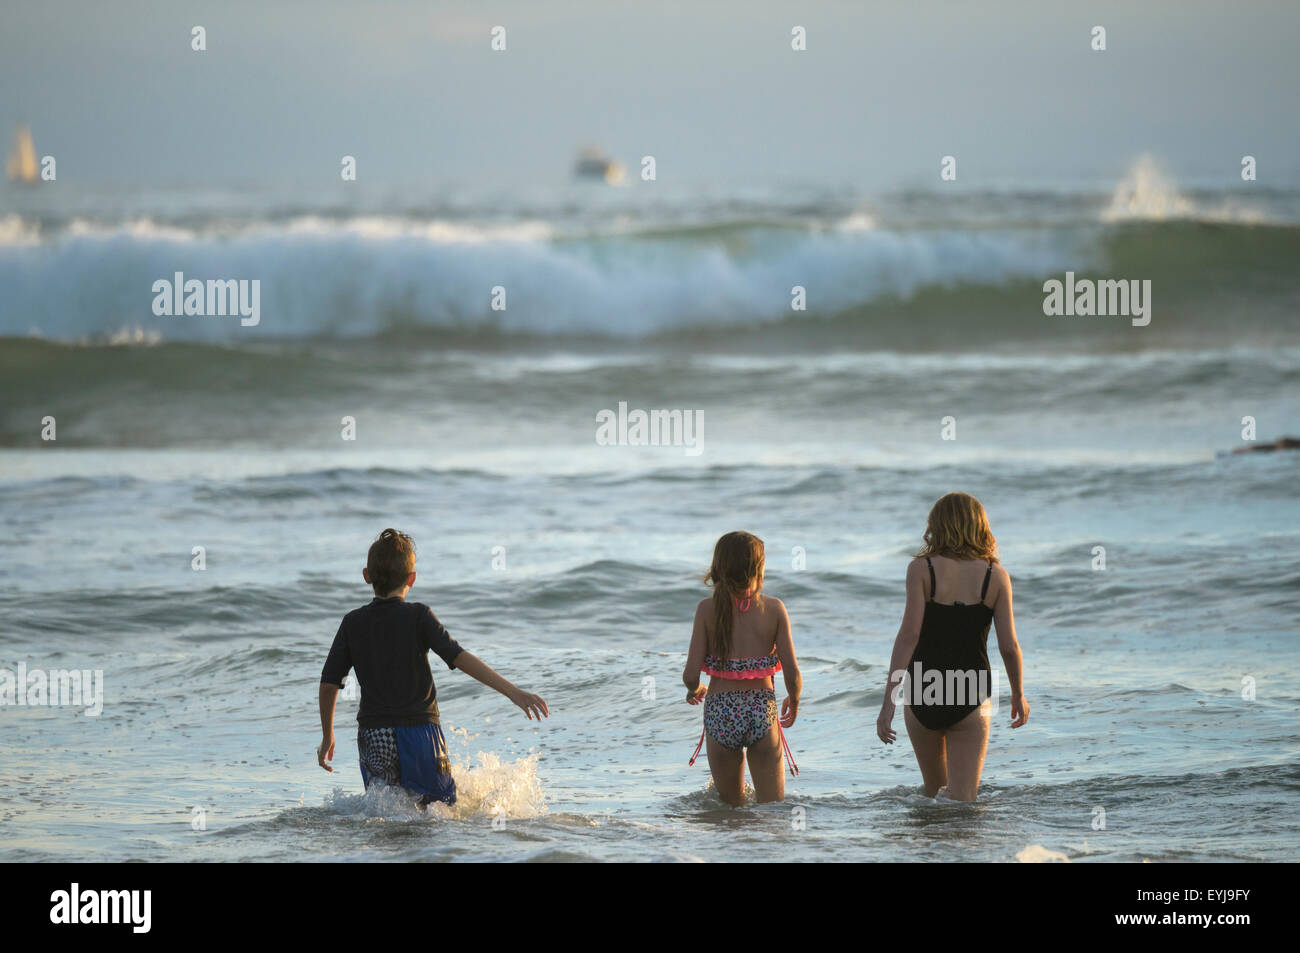 Kids in surf at Ocean Beach, CA Banque D'Images